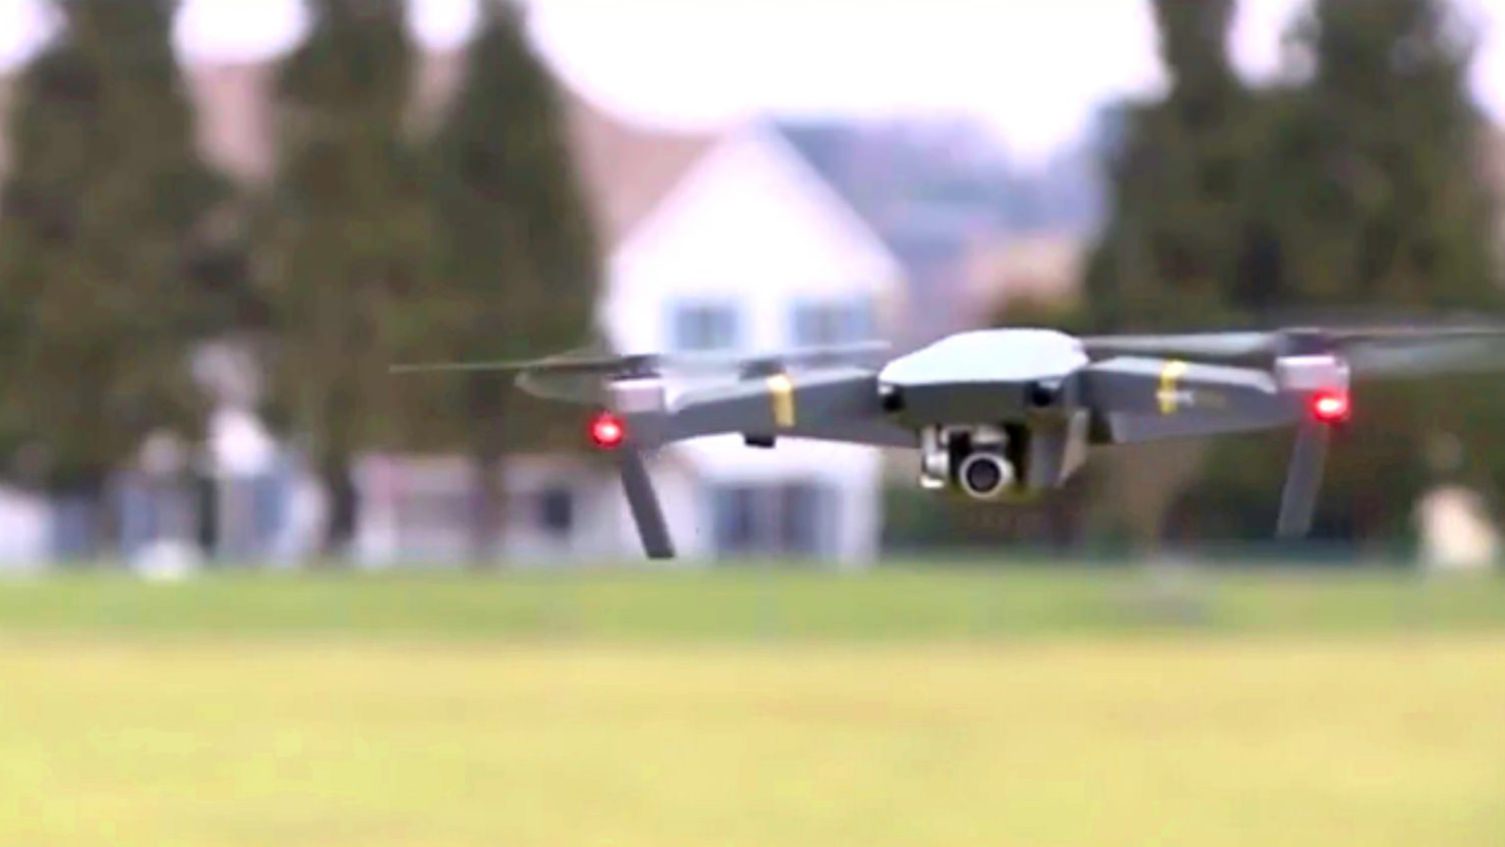 Pennsylvania introduces Unlawful Use of Unmanned Aircraft law